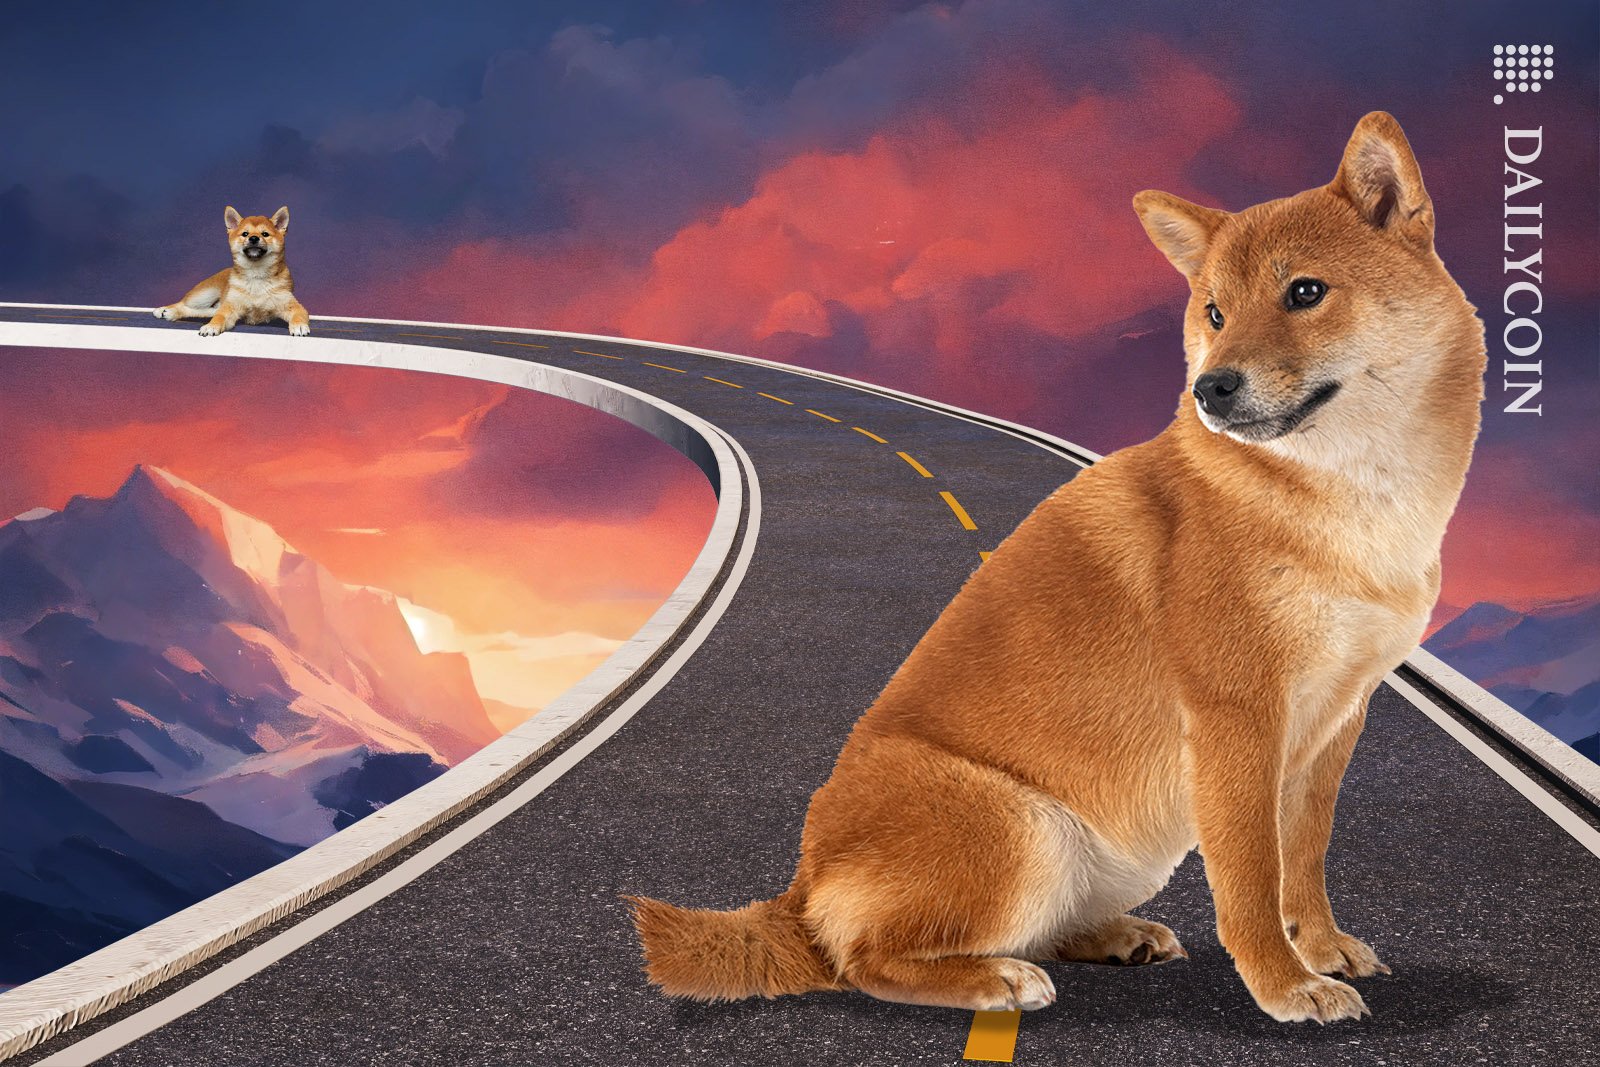 Shiba Inu looking back at the journey he accomploished from when he was a puppy.